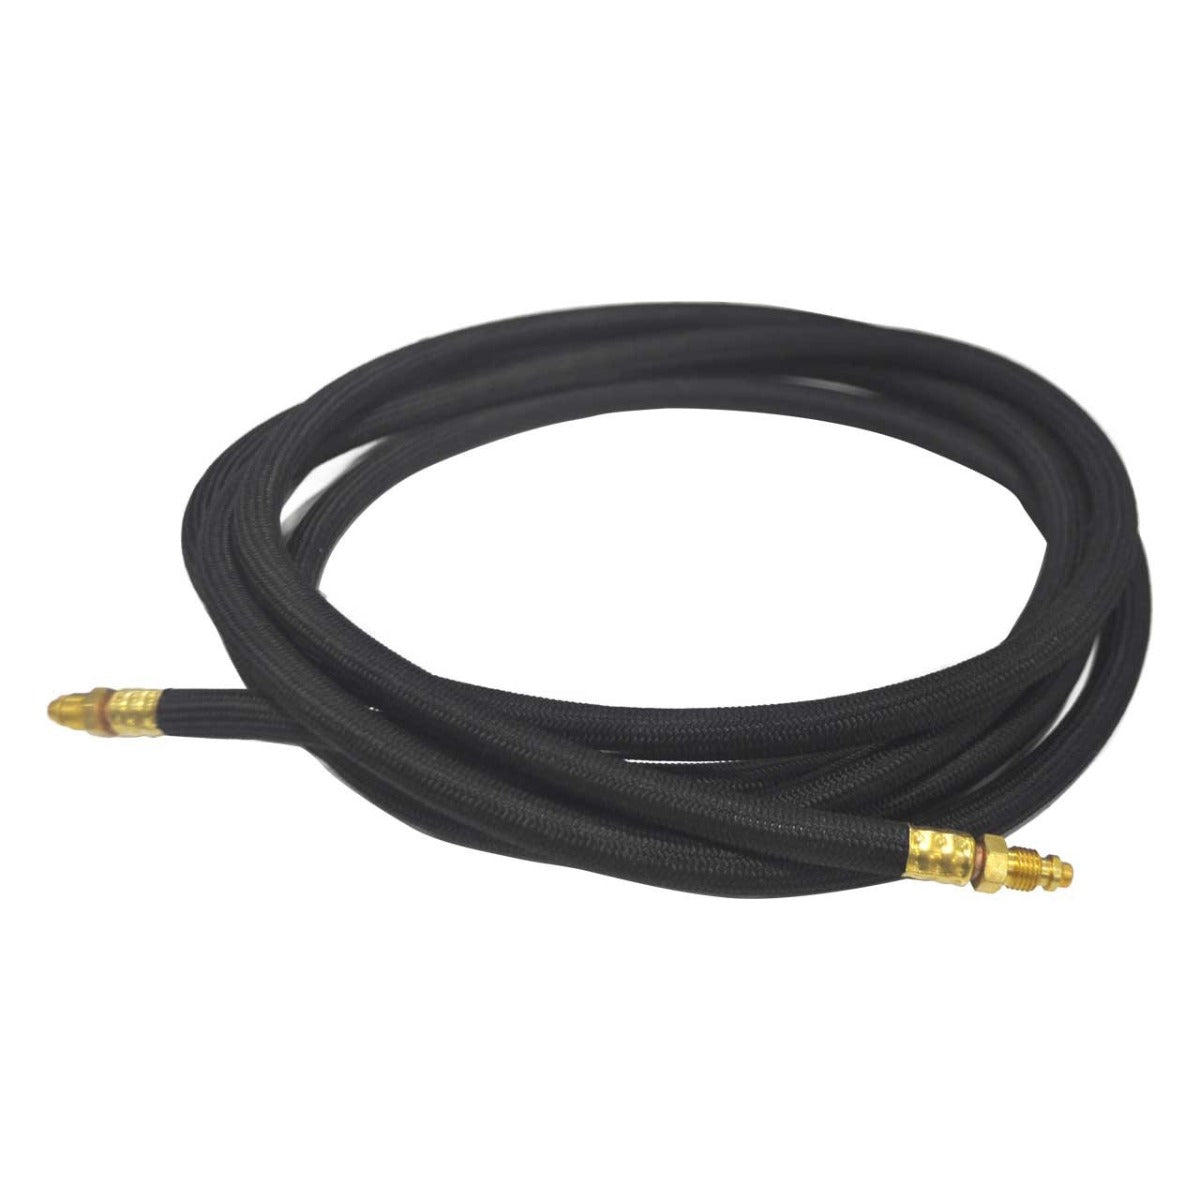 Weldtec Super Flex Power Cable for 9, 17, and 26 Torches 